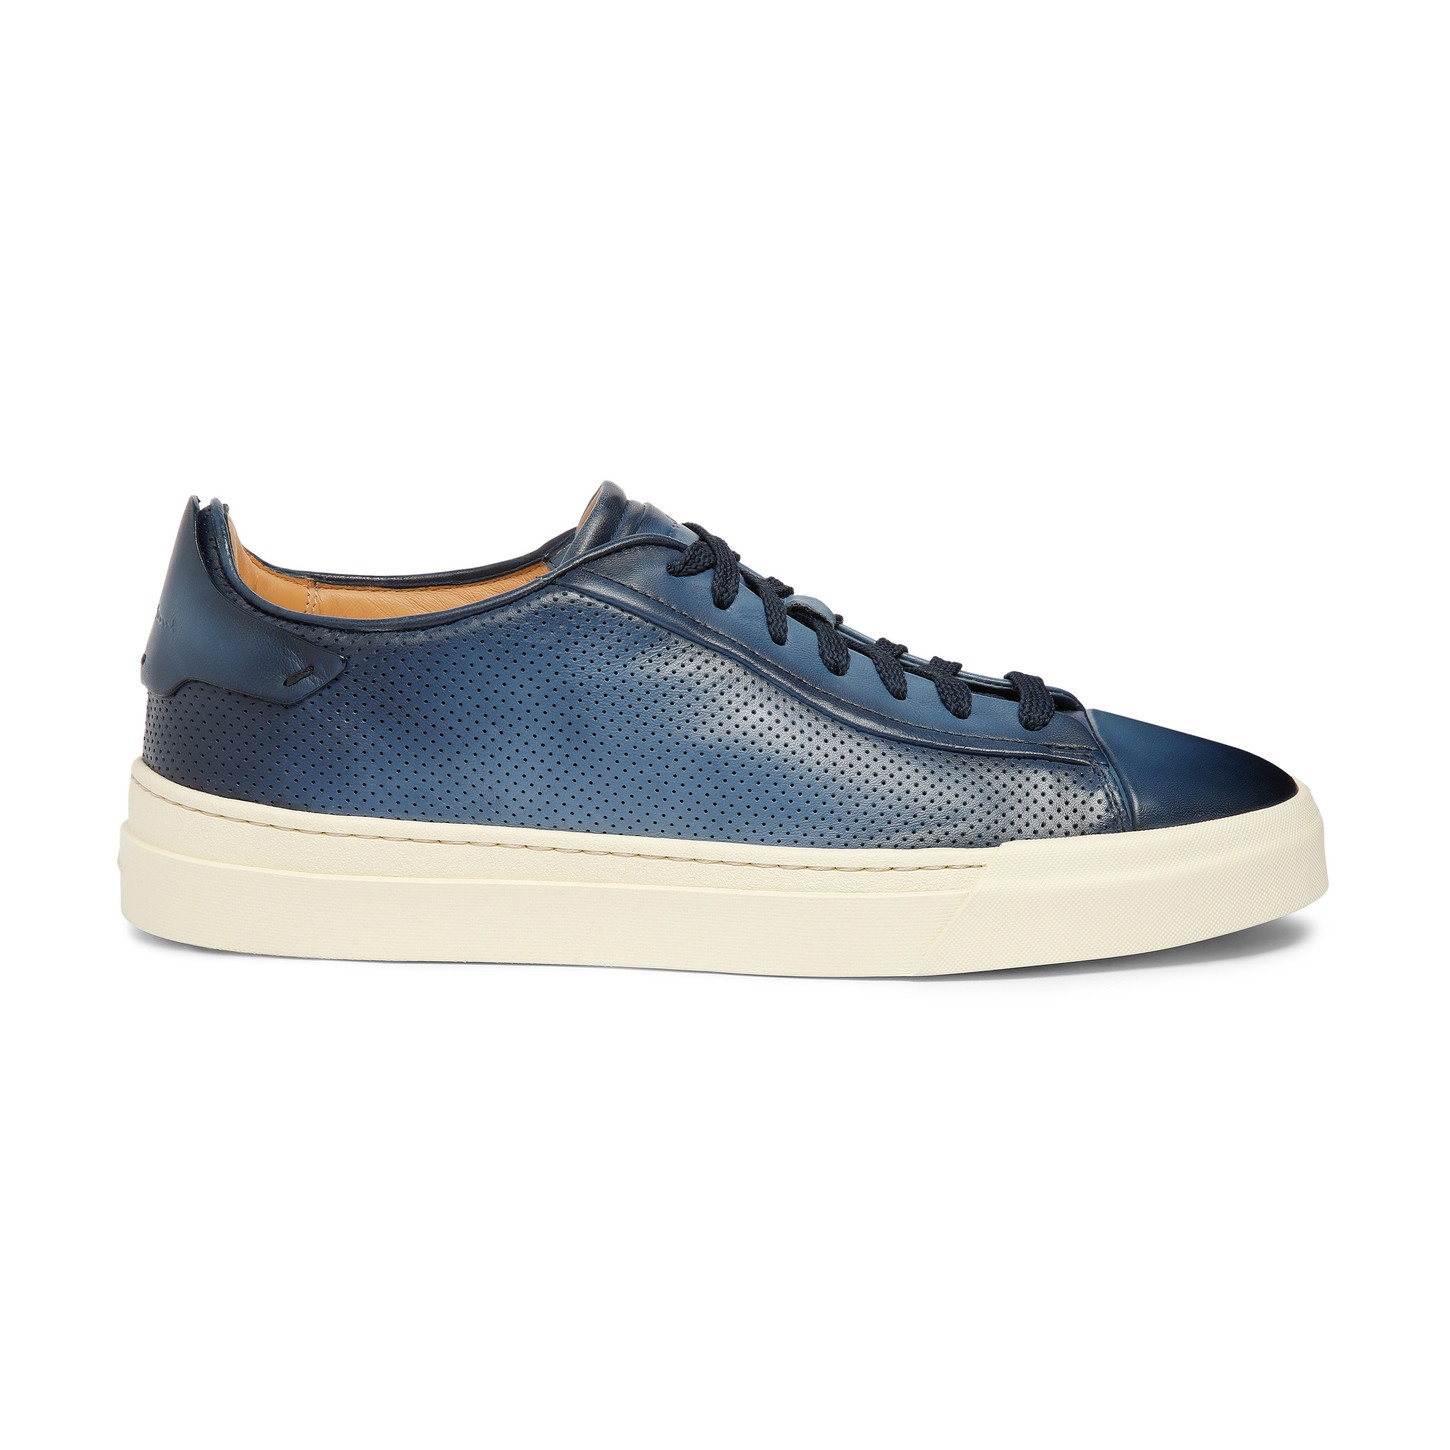 Men's polished blue leather perforated-effect sneaker - 1